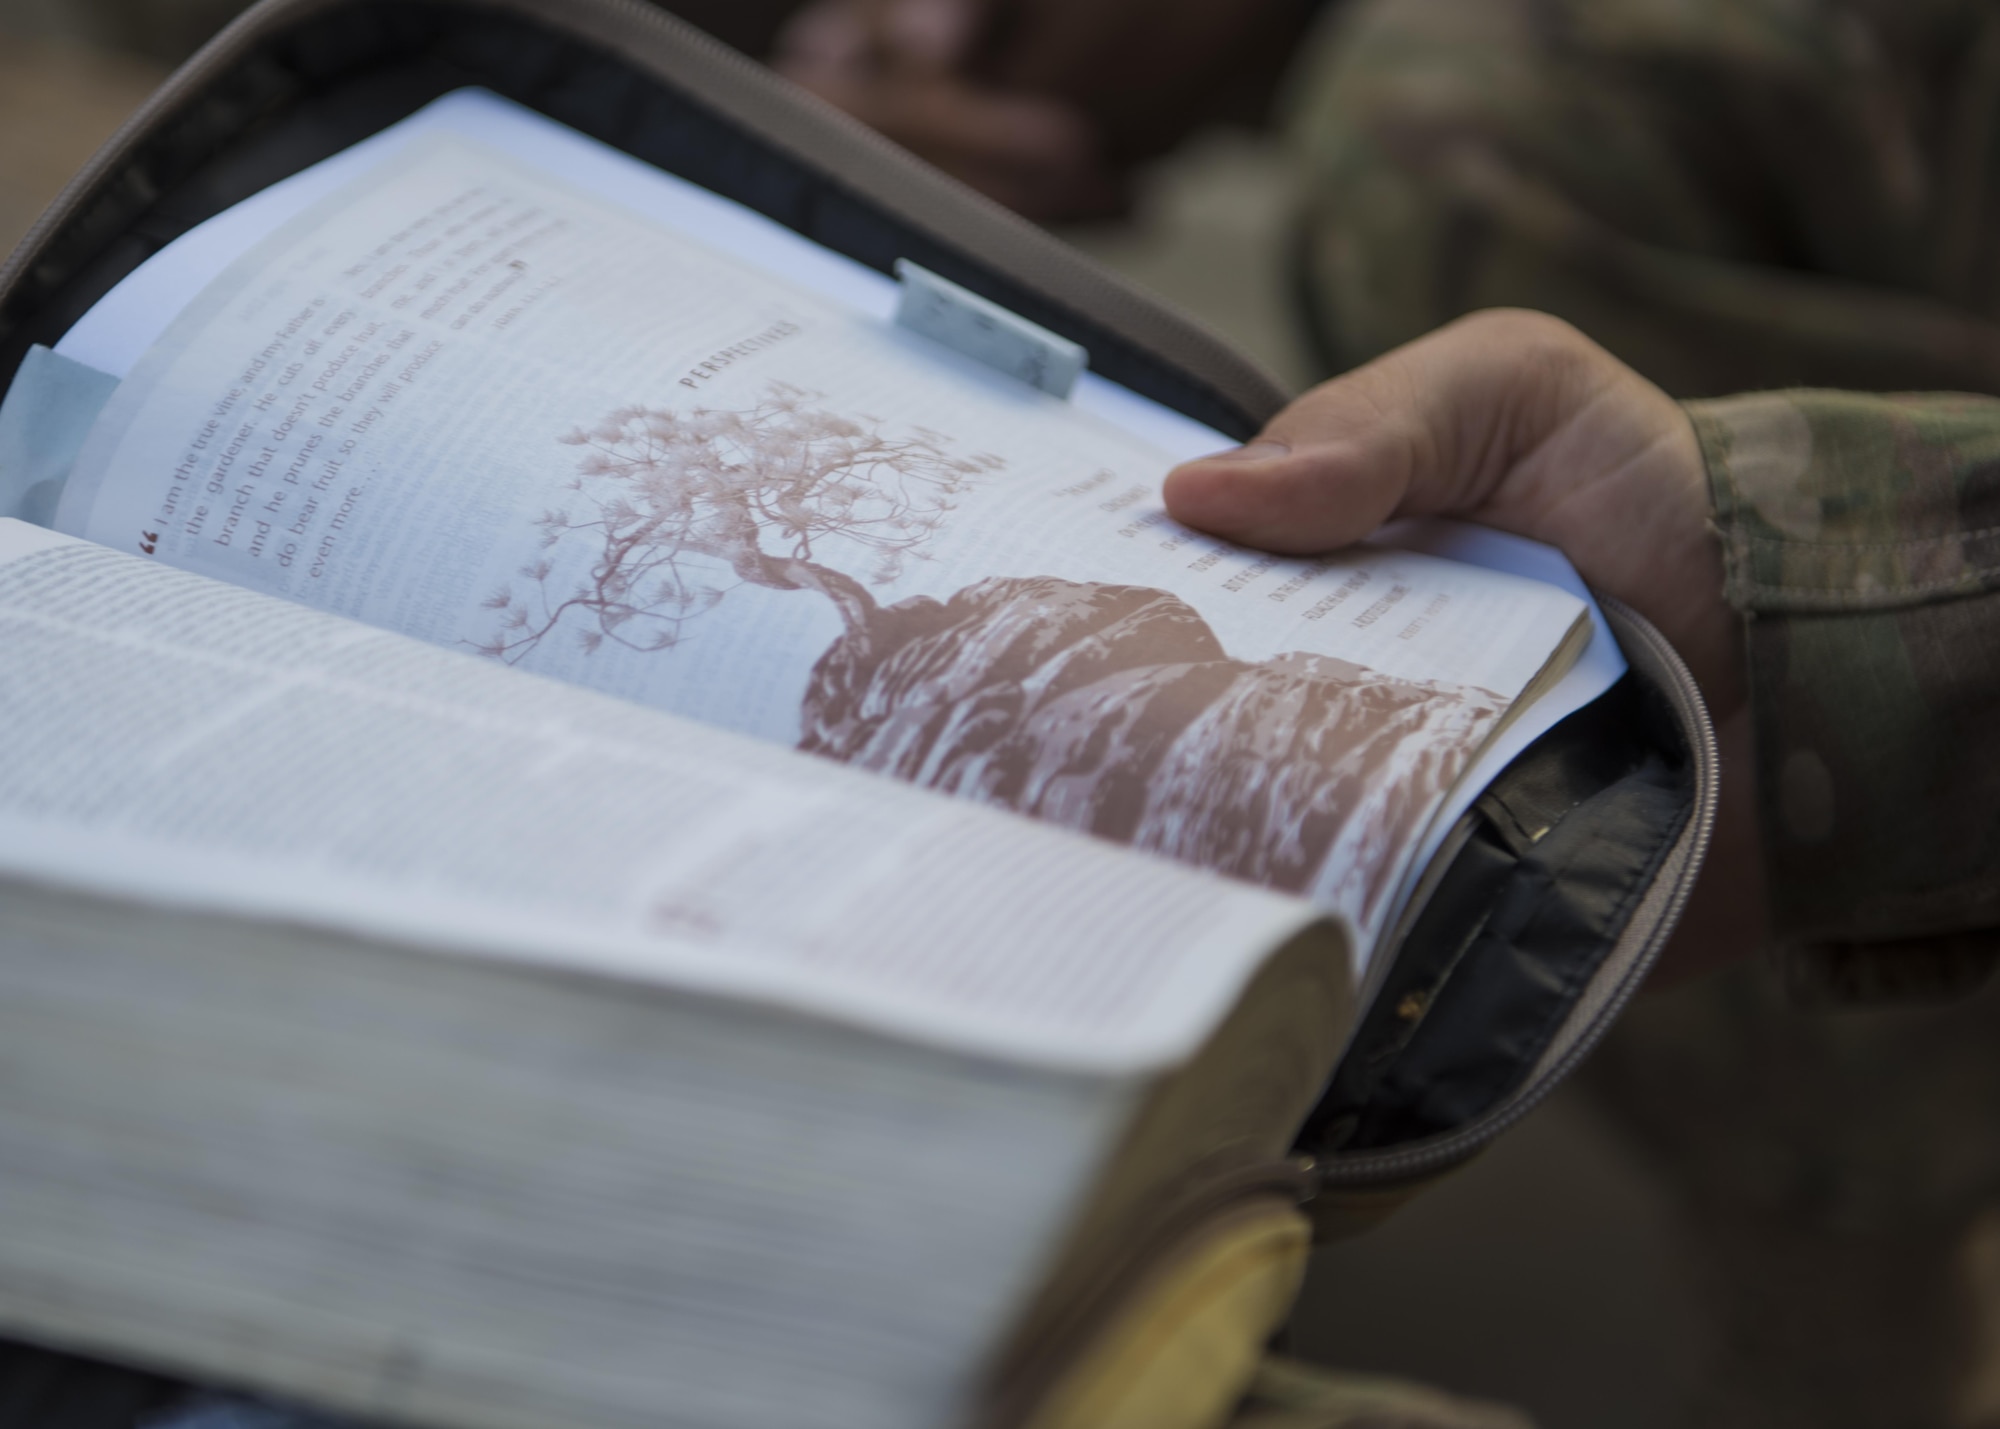 Capt. Jonathan Ayers, 455th Air Expeditionary Wing chaplain, reads a verse form the bible, Bagram Airfield, Afghanistan, Aug. 3, 2016. The chaplain team provides weekly bible study classes for Bagram personnel as a means to build and maintain spiritual resiliency. They support 10 units on the eastside of the base and also perform worship services and ceremonies for not only their own faith, but provides avenues to support other faiths. (U.S. Air Force photo by Senior Airman Justyn M. Freeman)